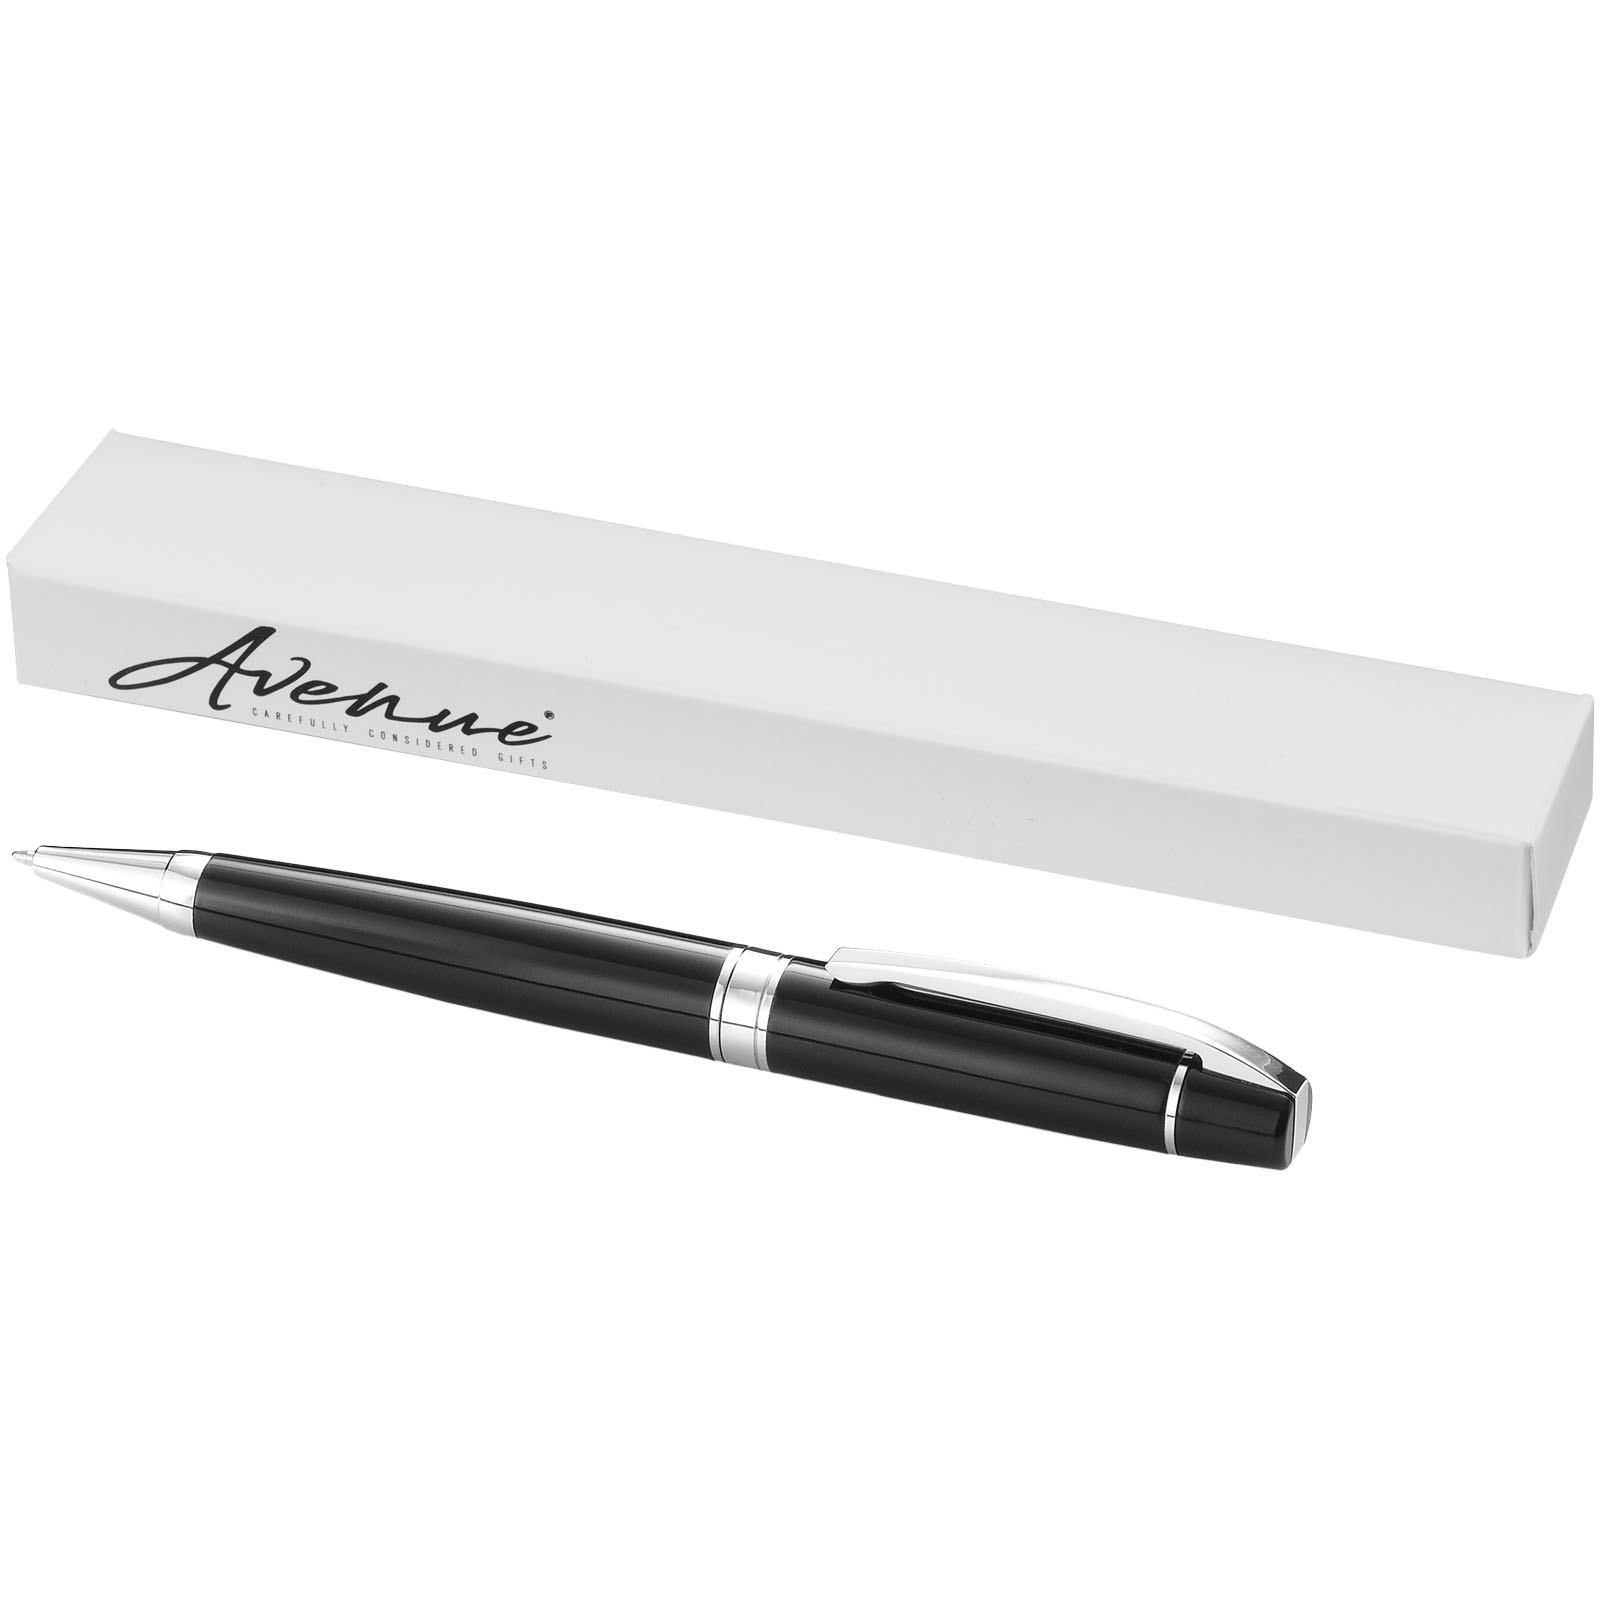 Ballpoint Pen with a Classic Design - Chettle - Great Rissington